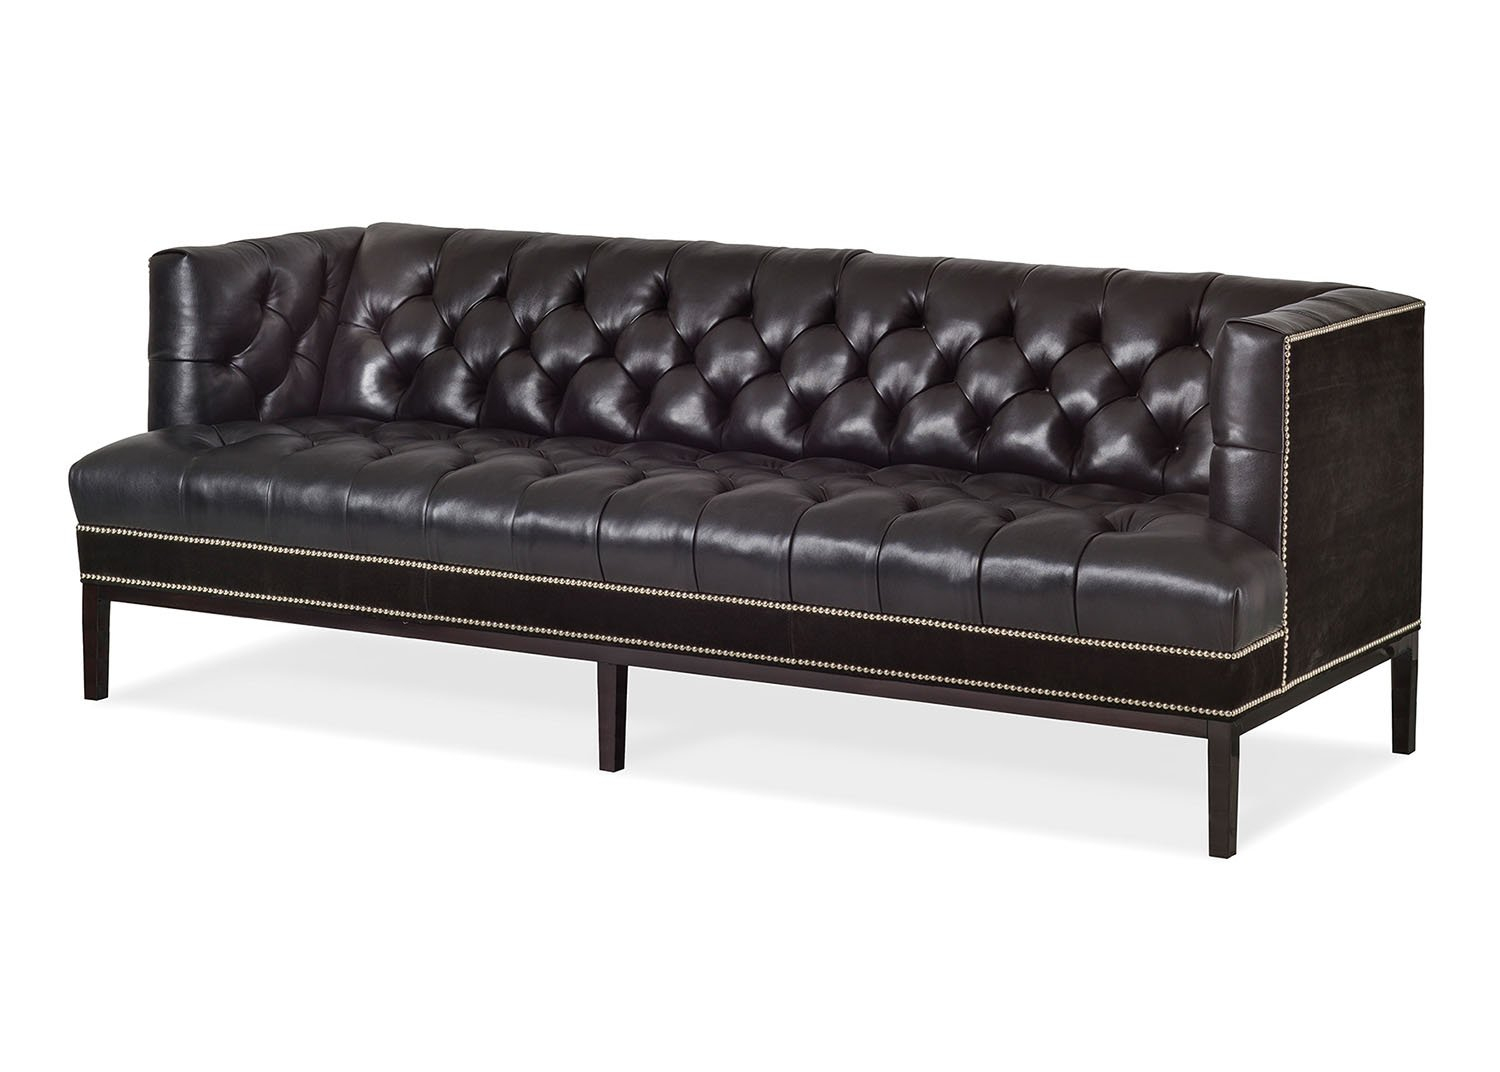 Cityscape Tufted Leather Sofa Mobilart Decor High End with regard to sizing 1500 X 1072